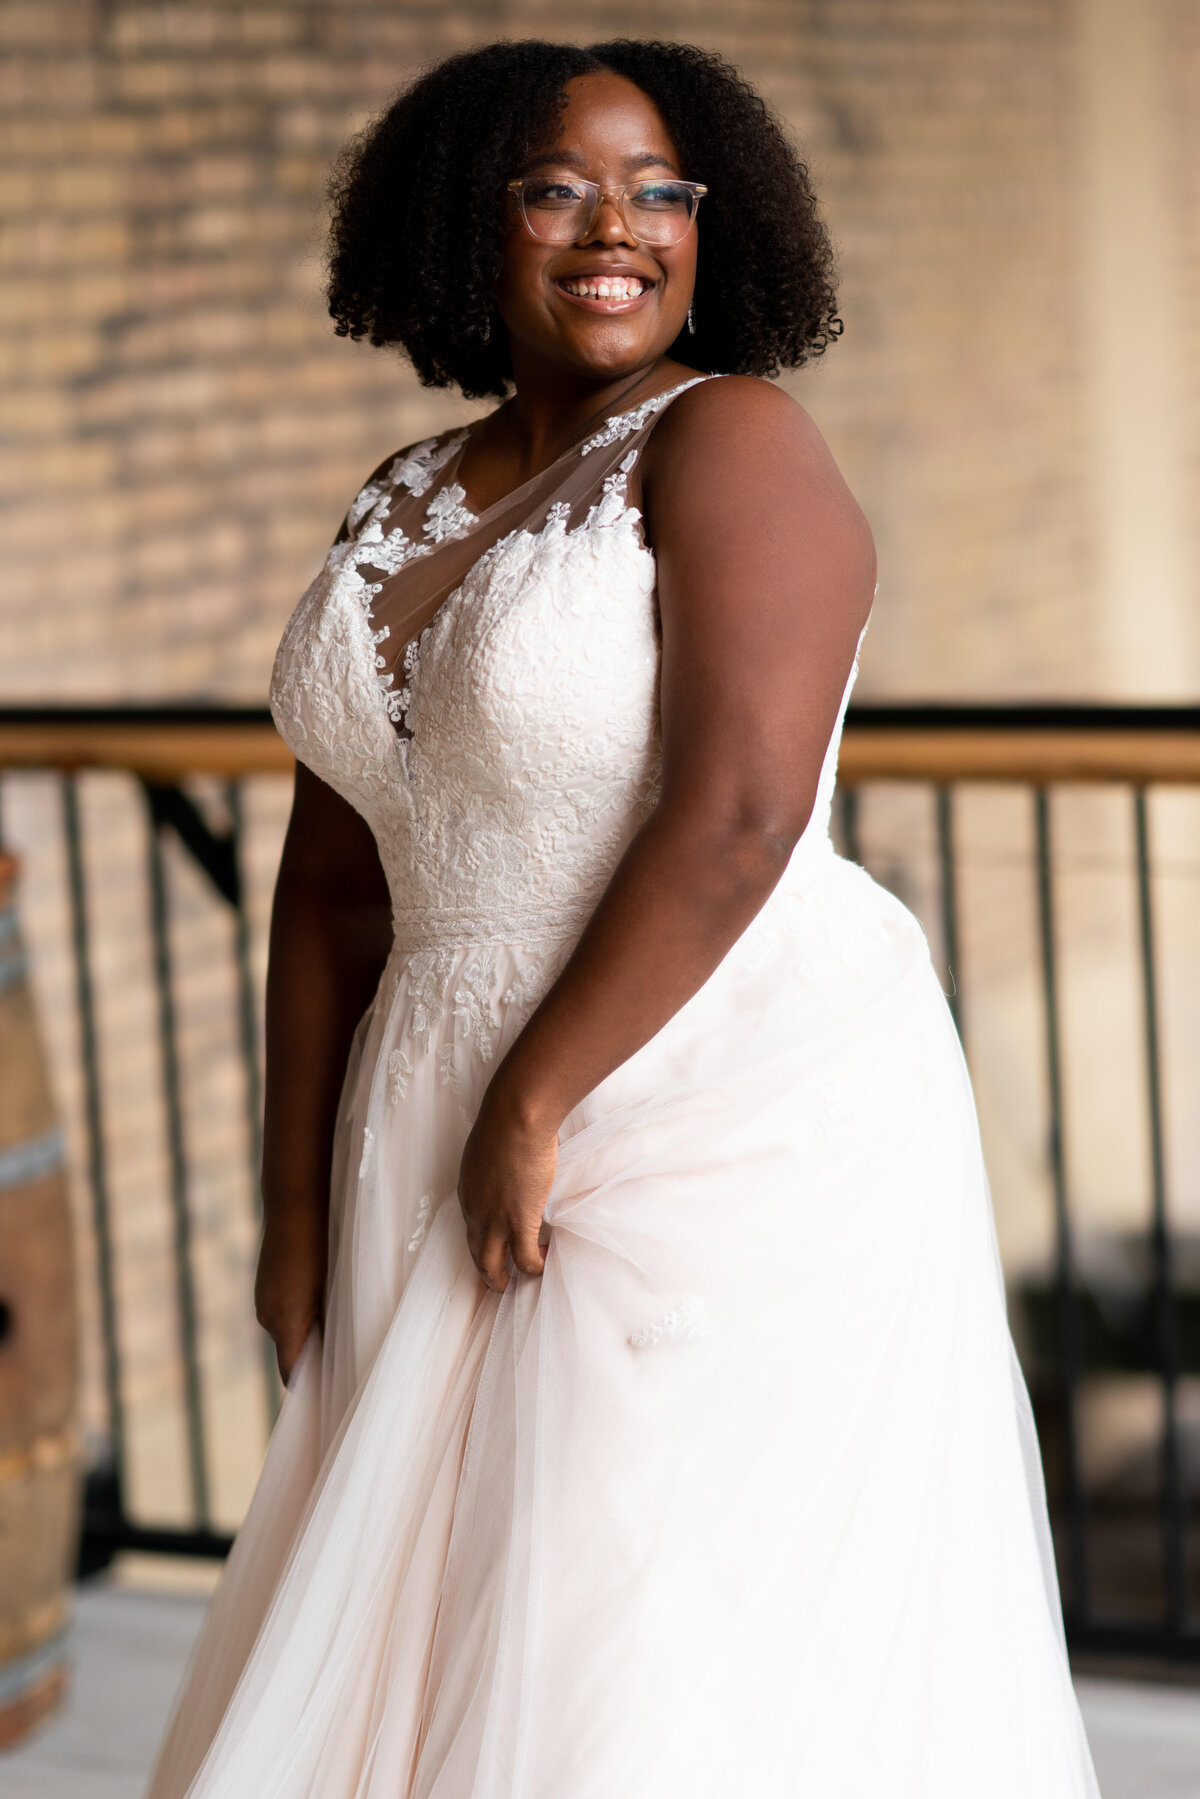 Black bride with glasses laughs wearing her wedding dress.